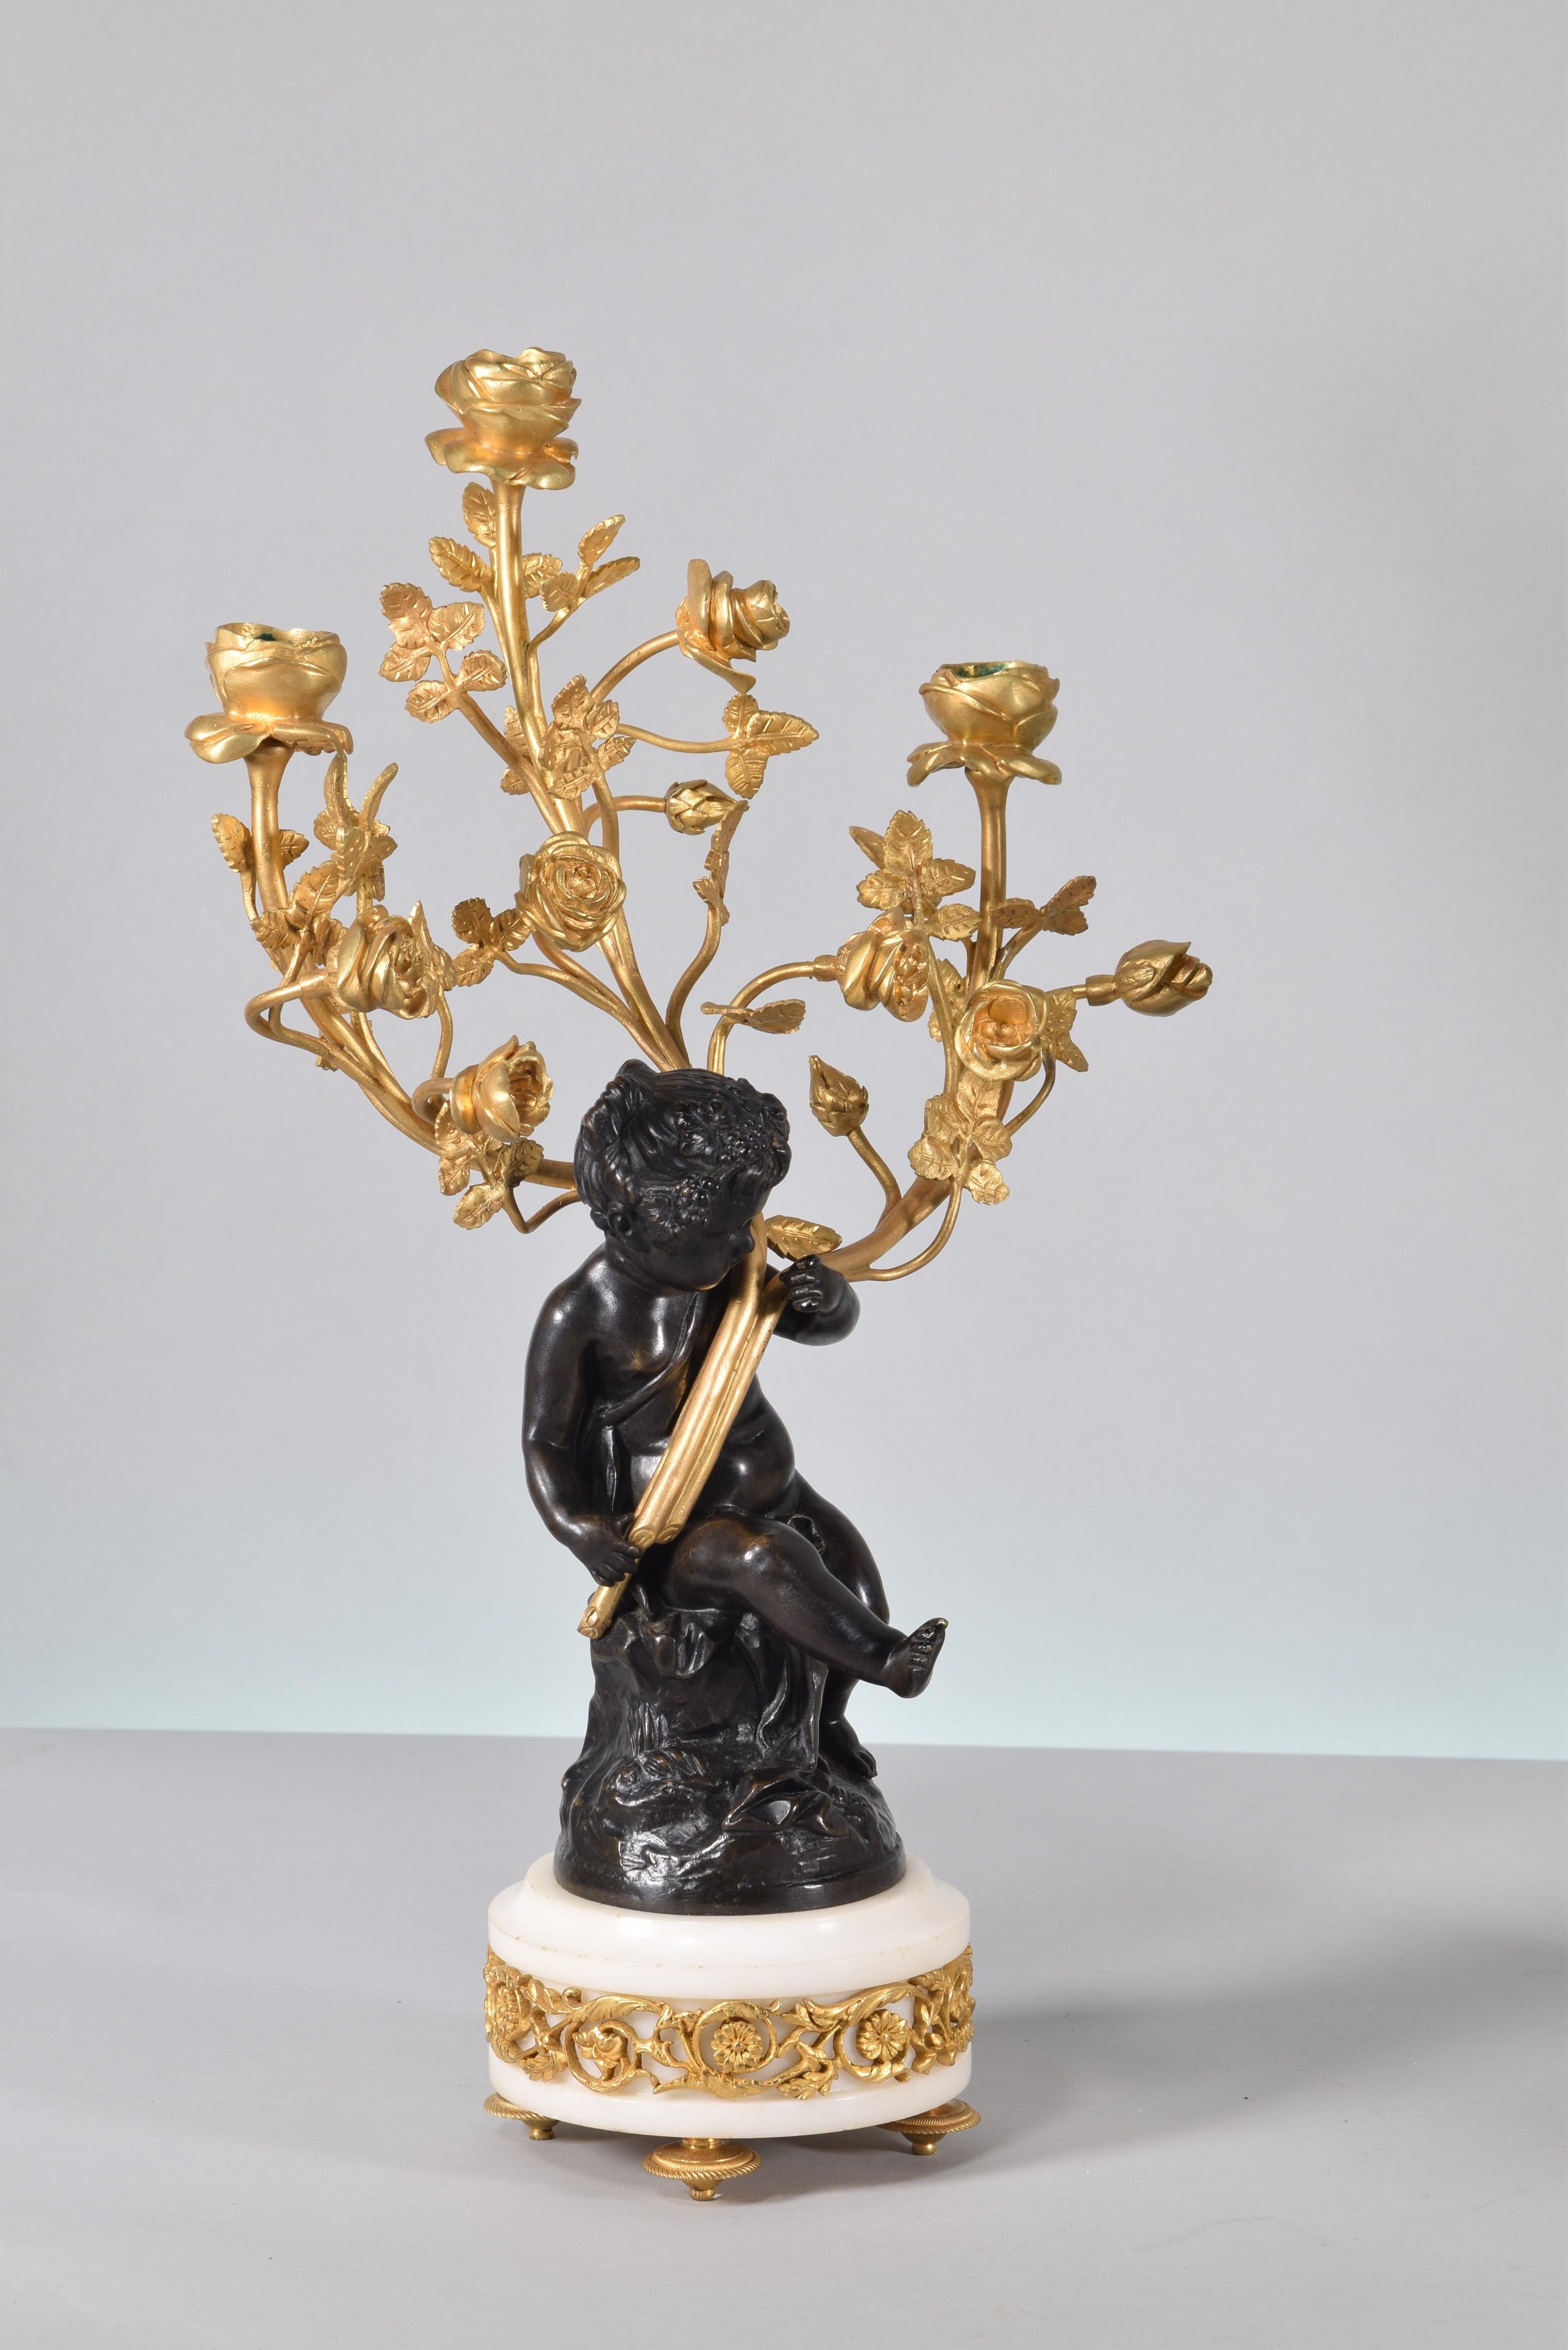 Neoclassical Revival Clock and candelabra garniture. Paris, France, second half 19th century. For Sale